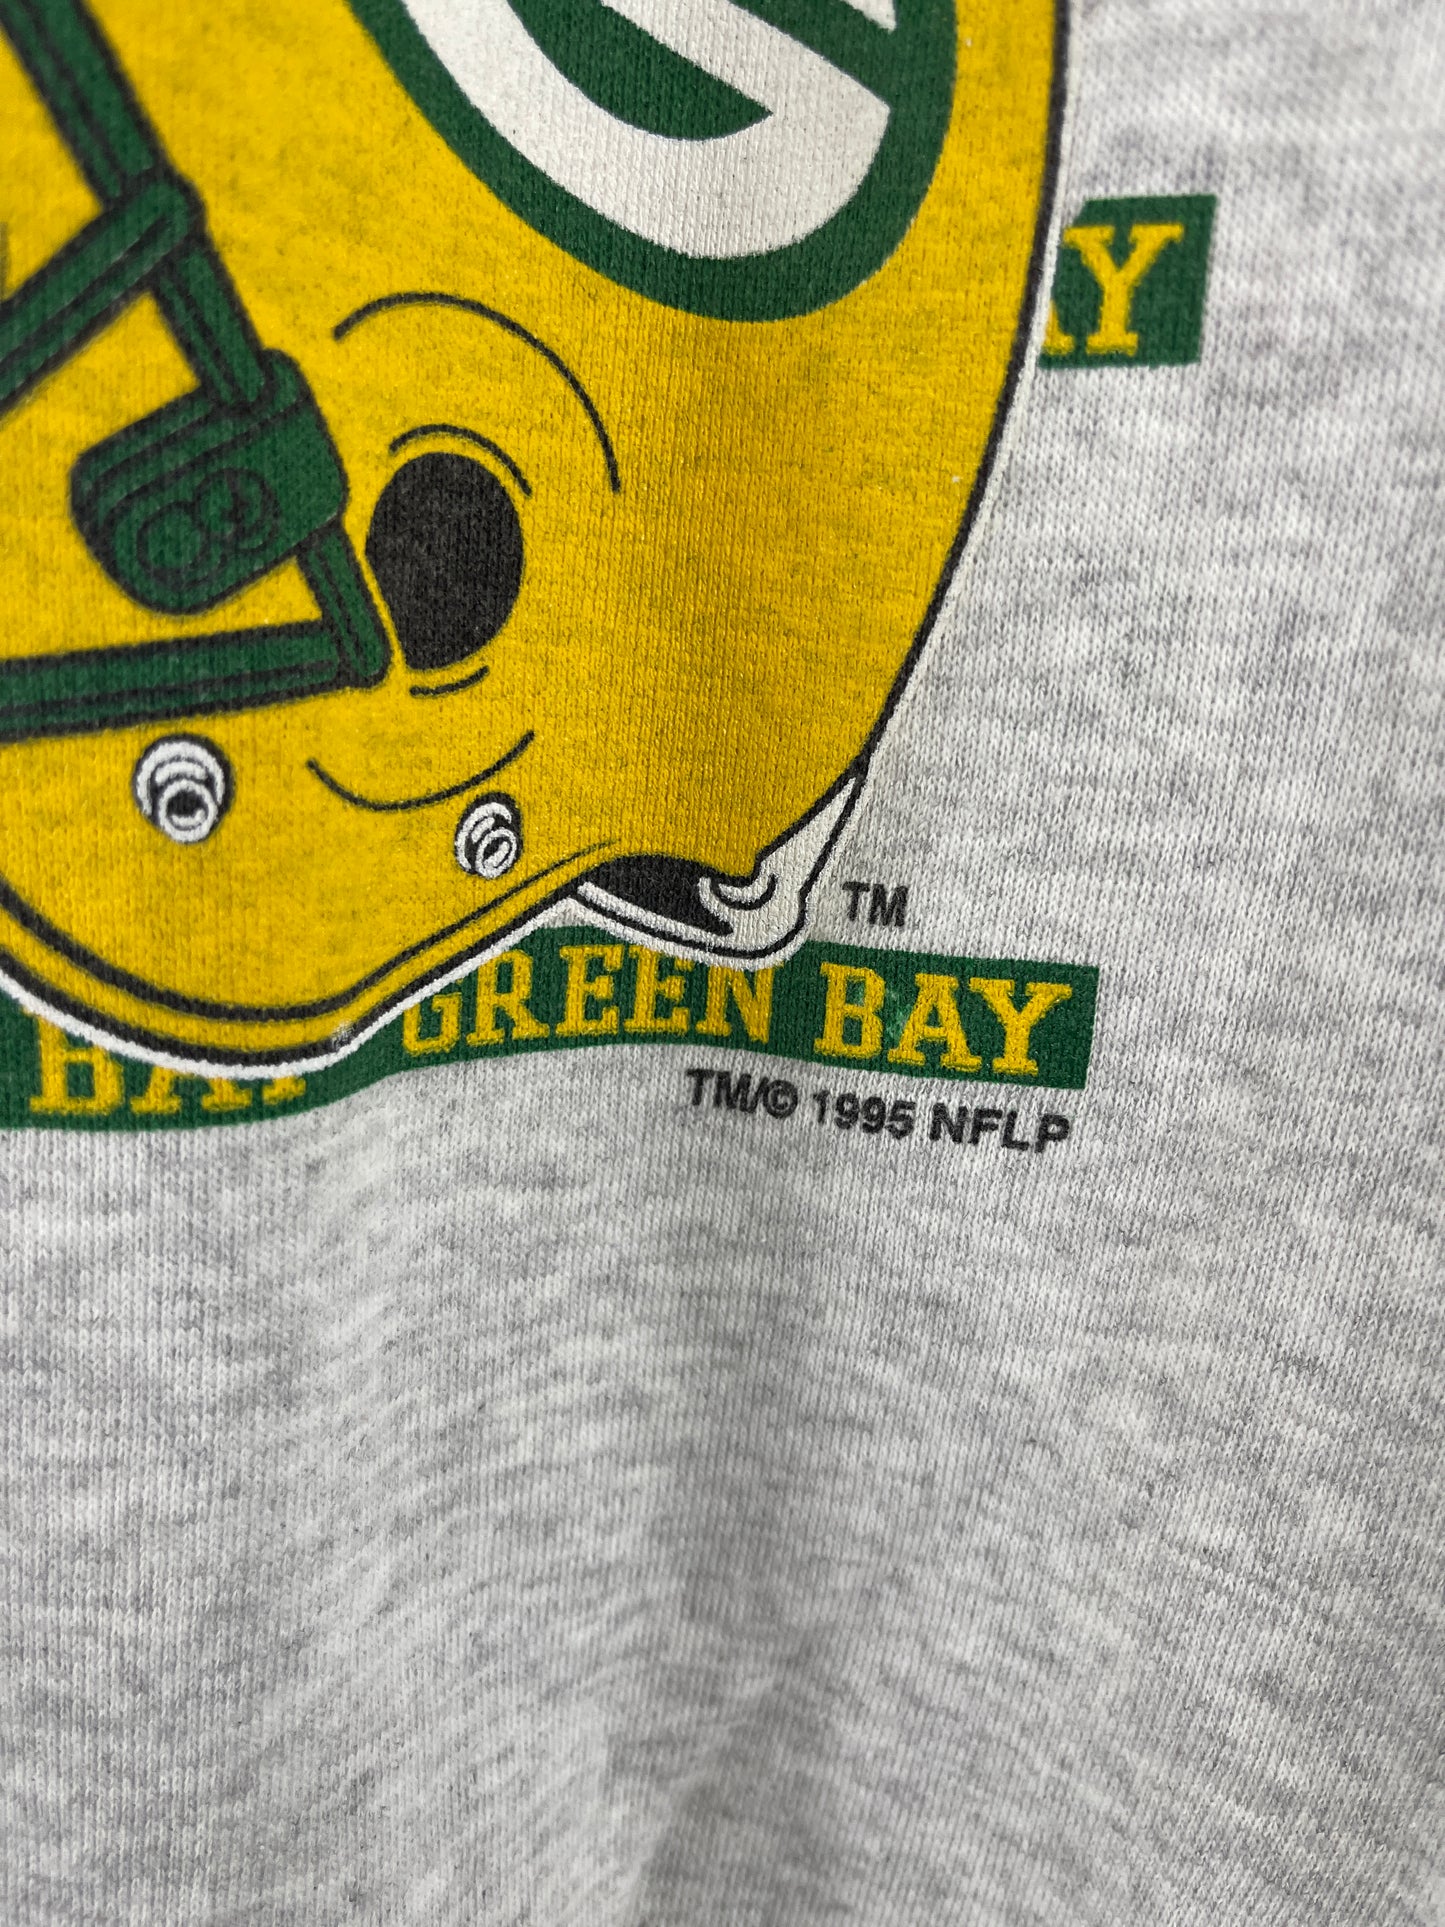 Vintage Green Bay Packers NFC 1995 Champions NFL Crewneck